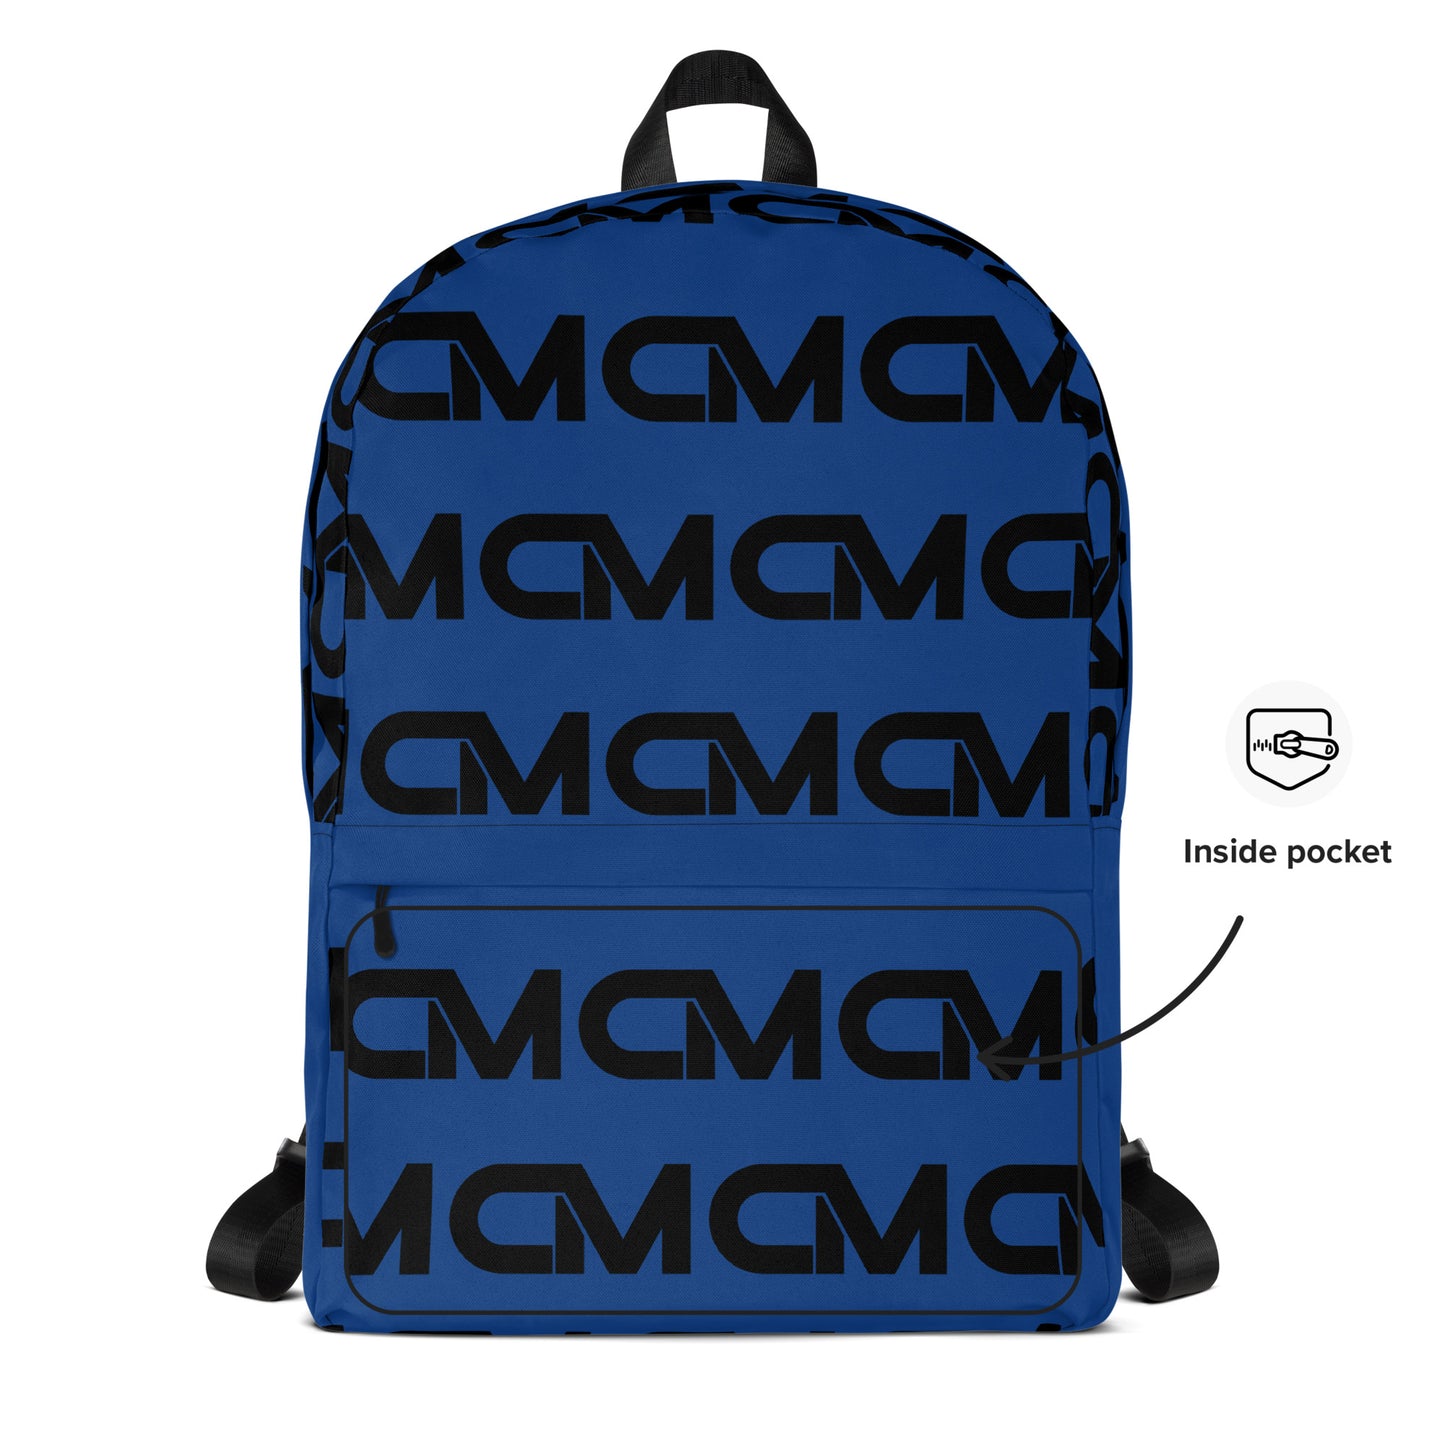 Cole McKey "CM" Backpack